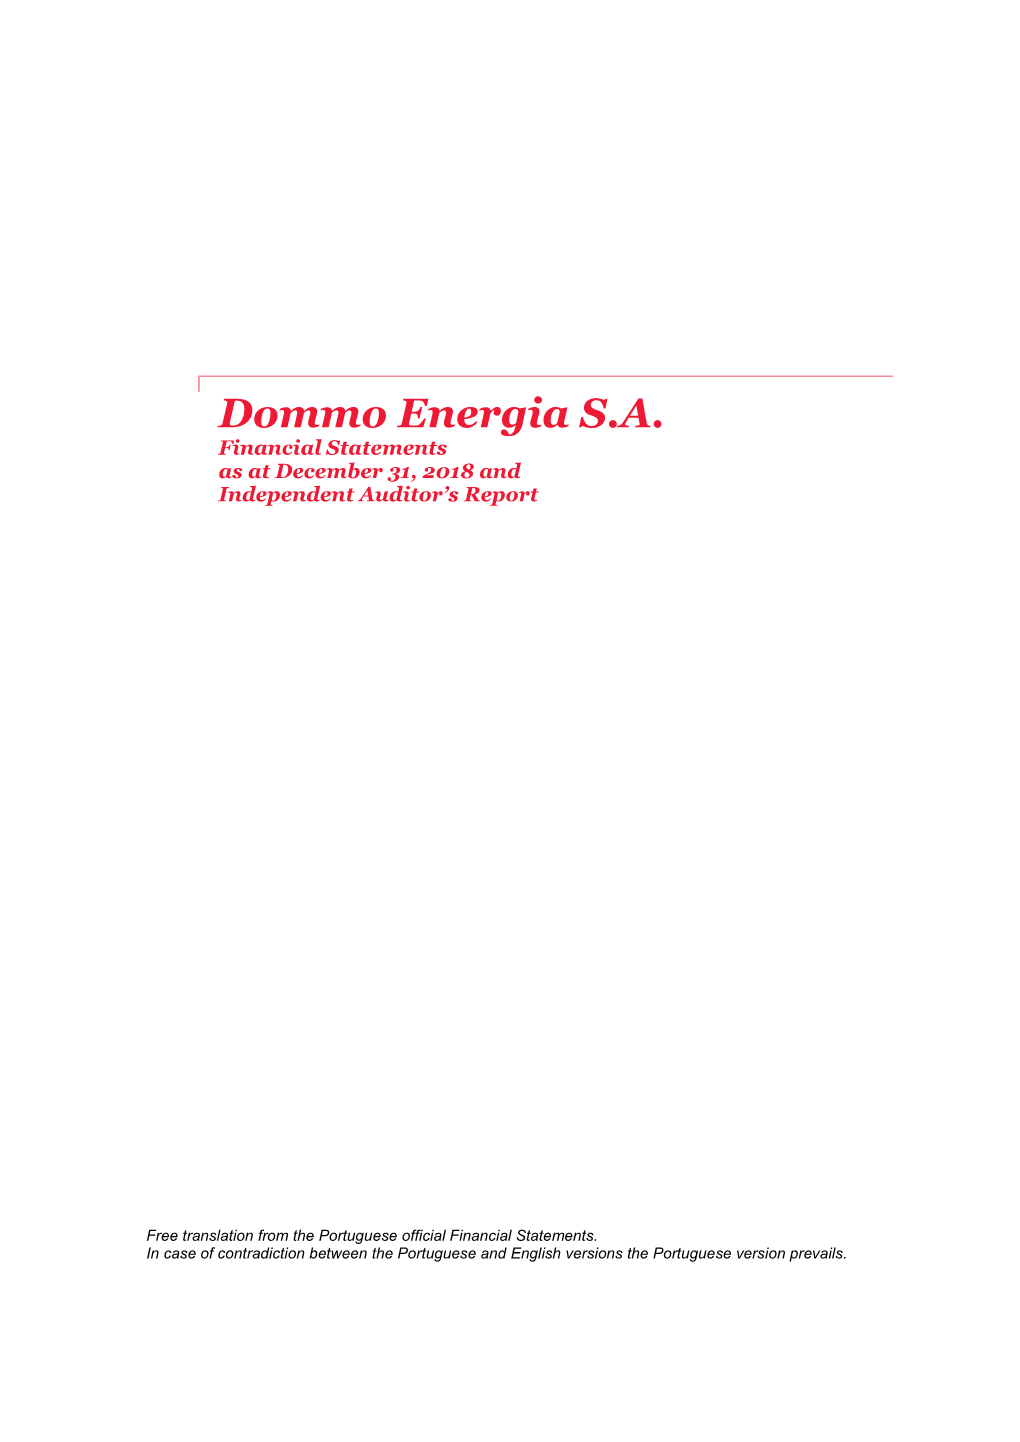 Dommo Energia S.A